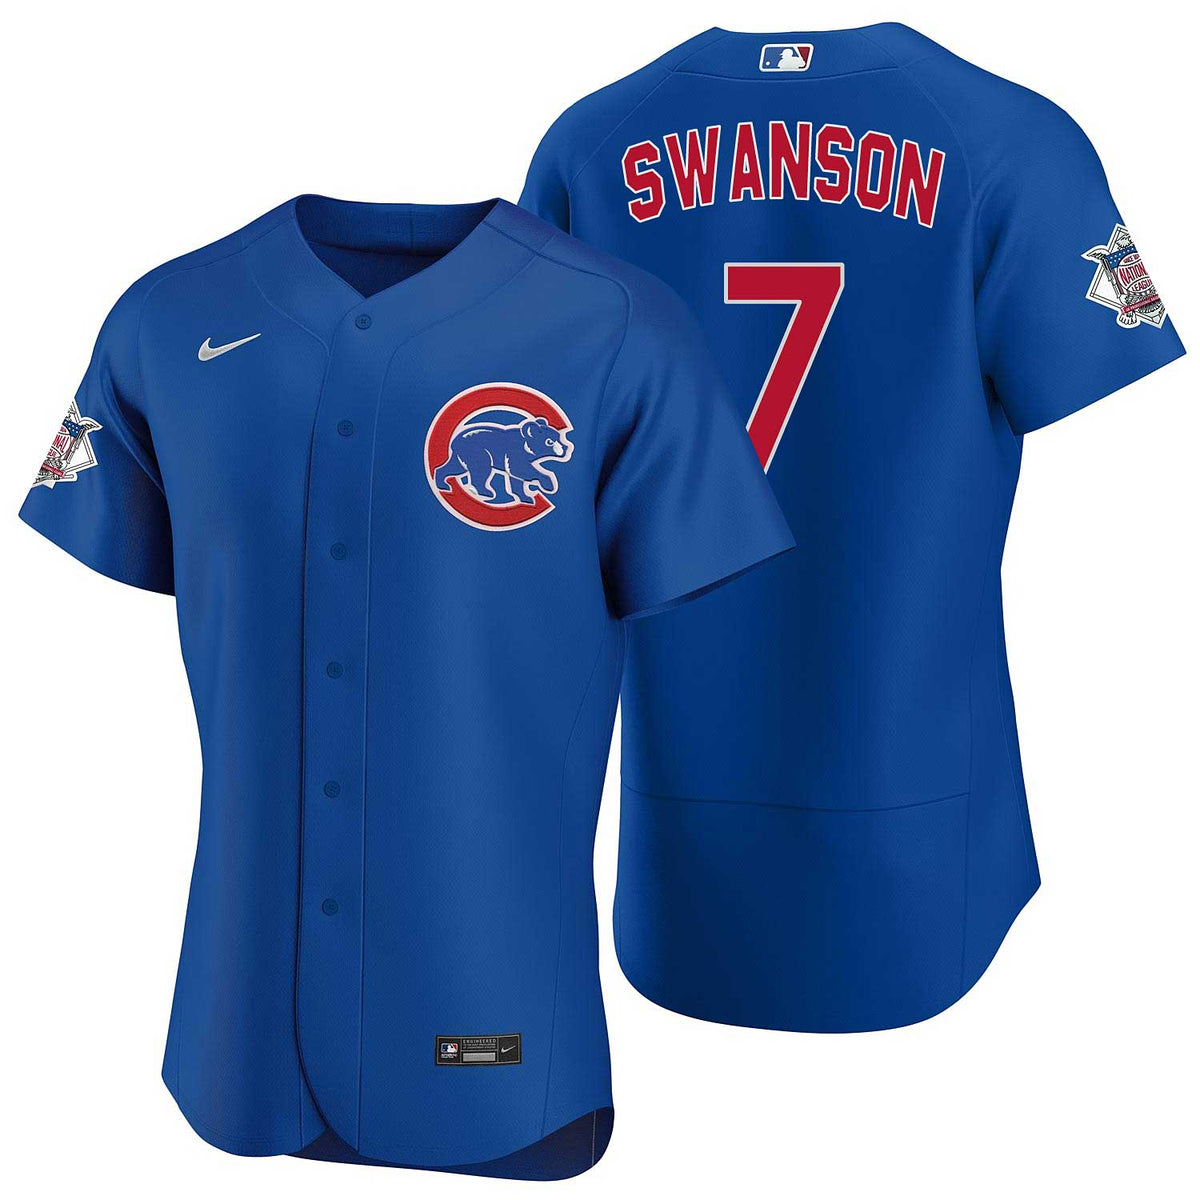 Men's Chicago Cubs Dansby Swanson Nike White/Royal Home Authentic